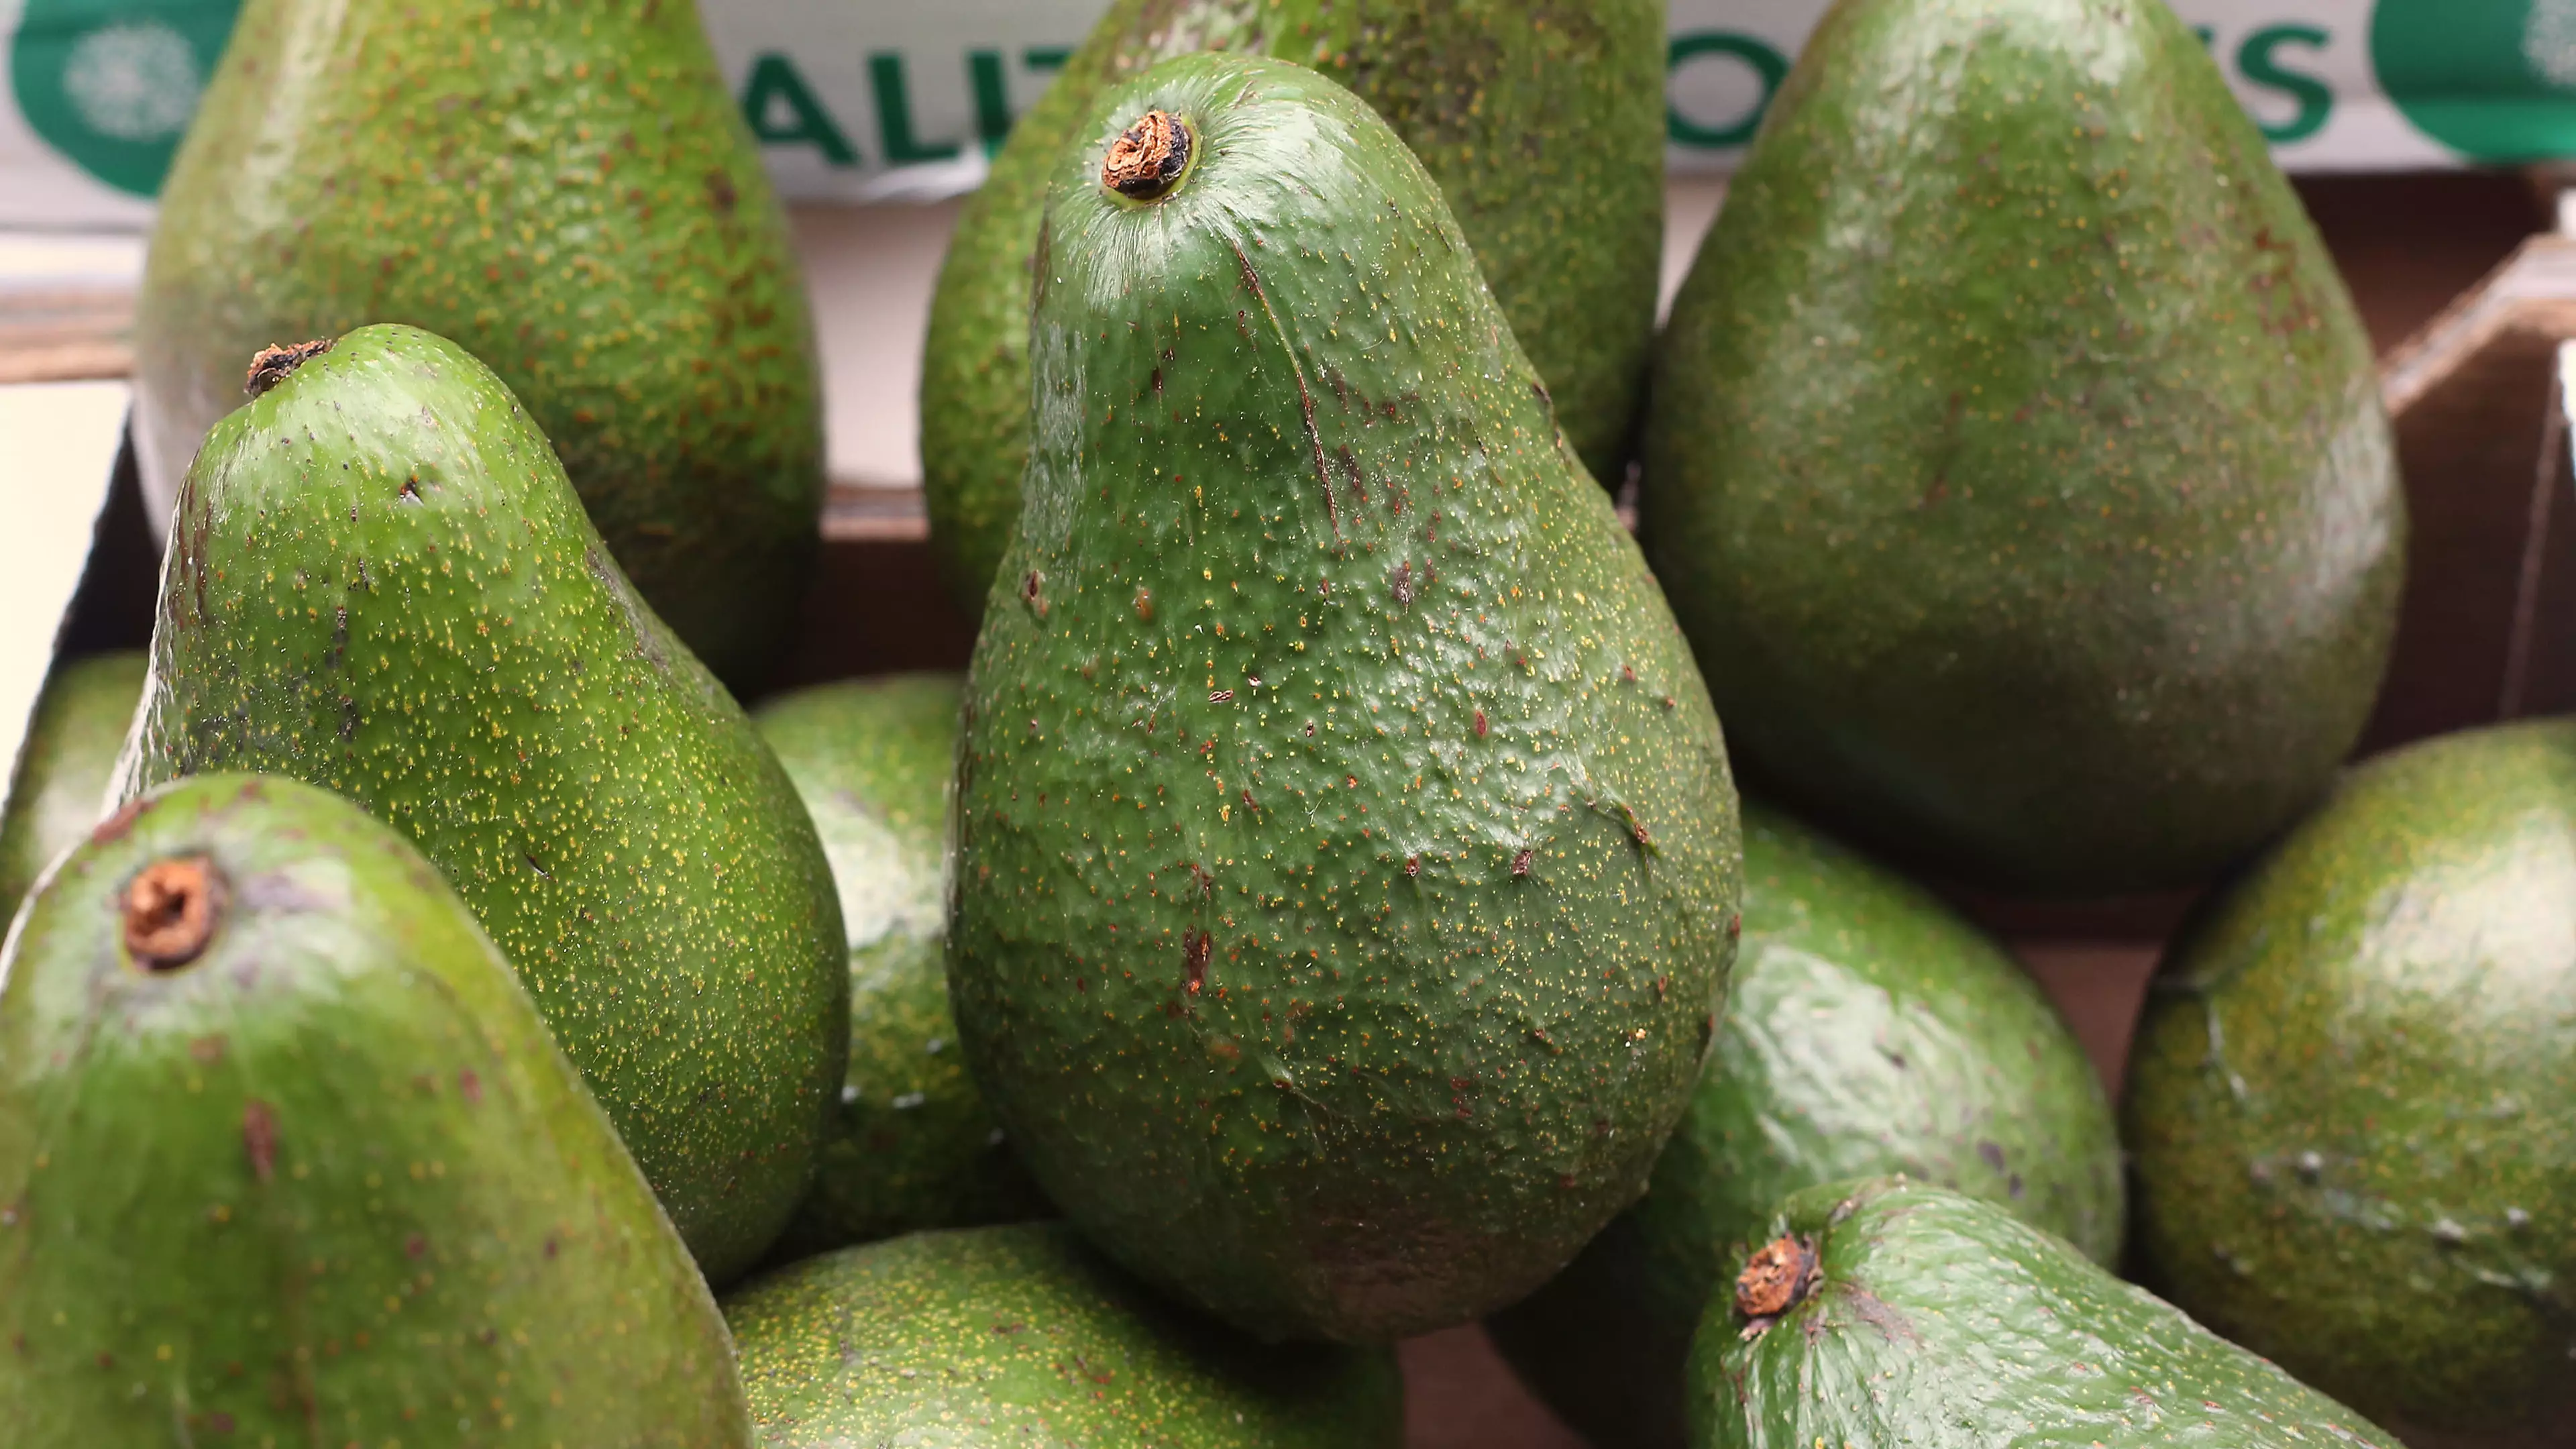 Man Arrested After Robbing Two Banks With An Avocado 